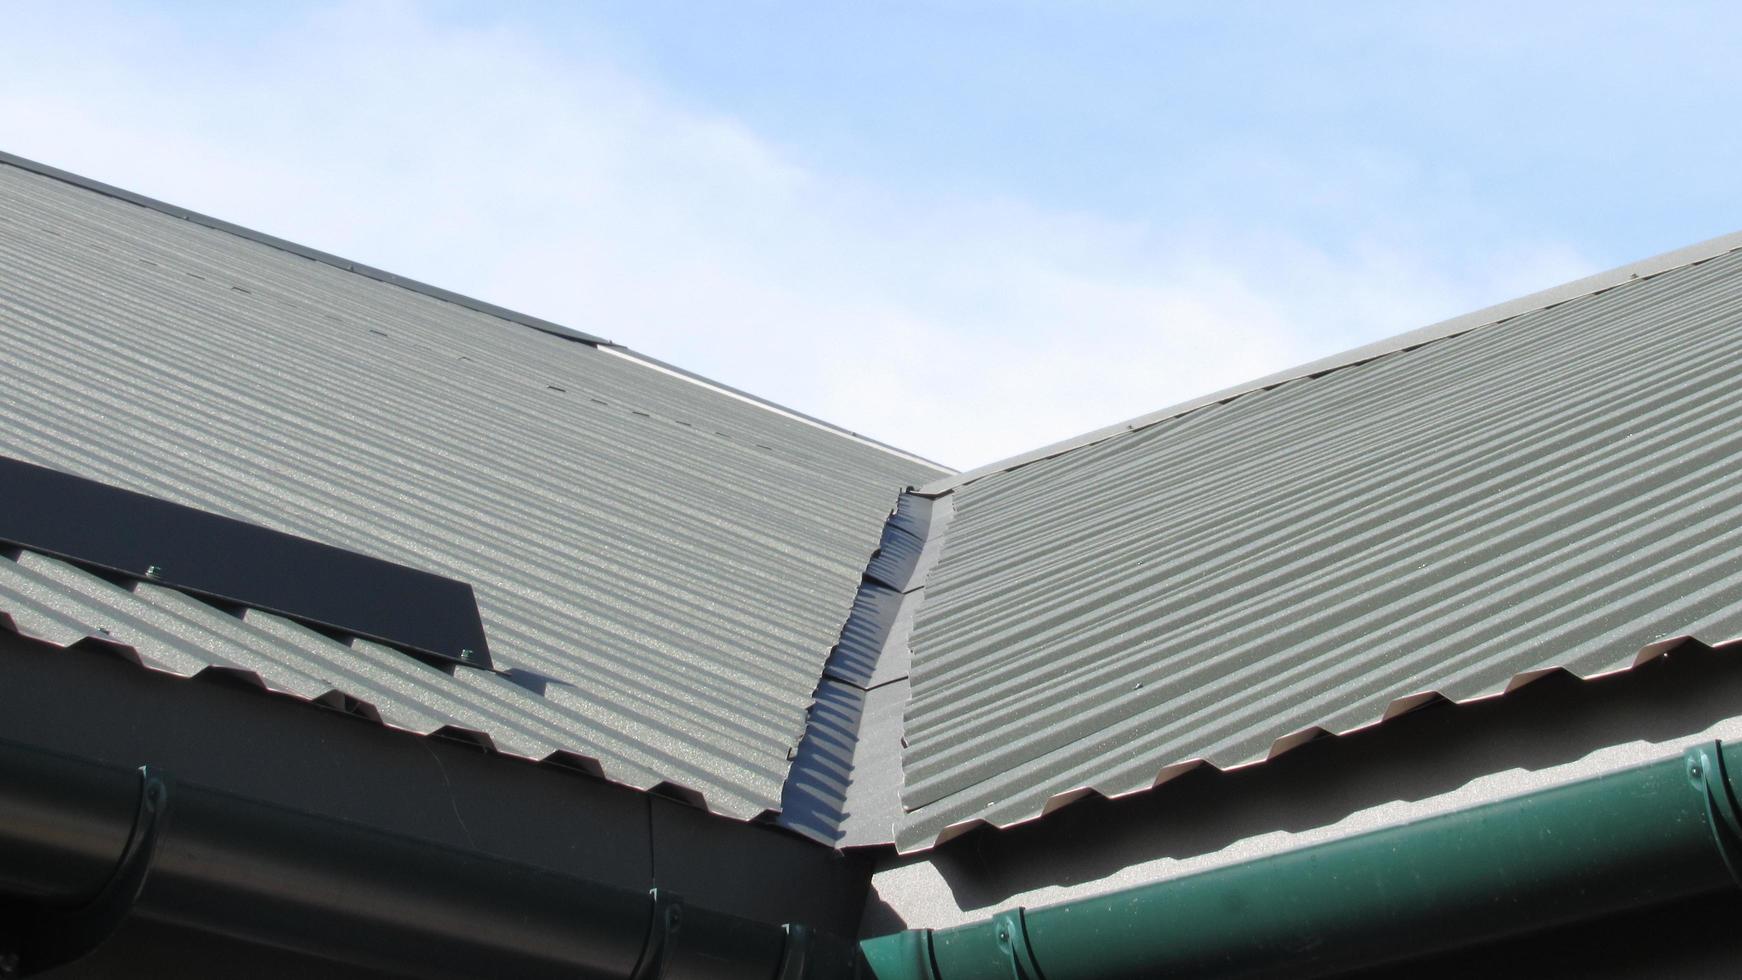 roofing. metal profile. replacement of coating for the house. roof repair photo